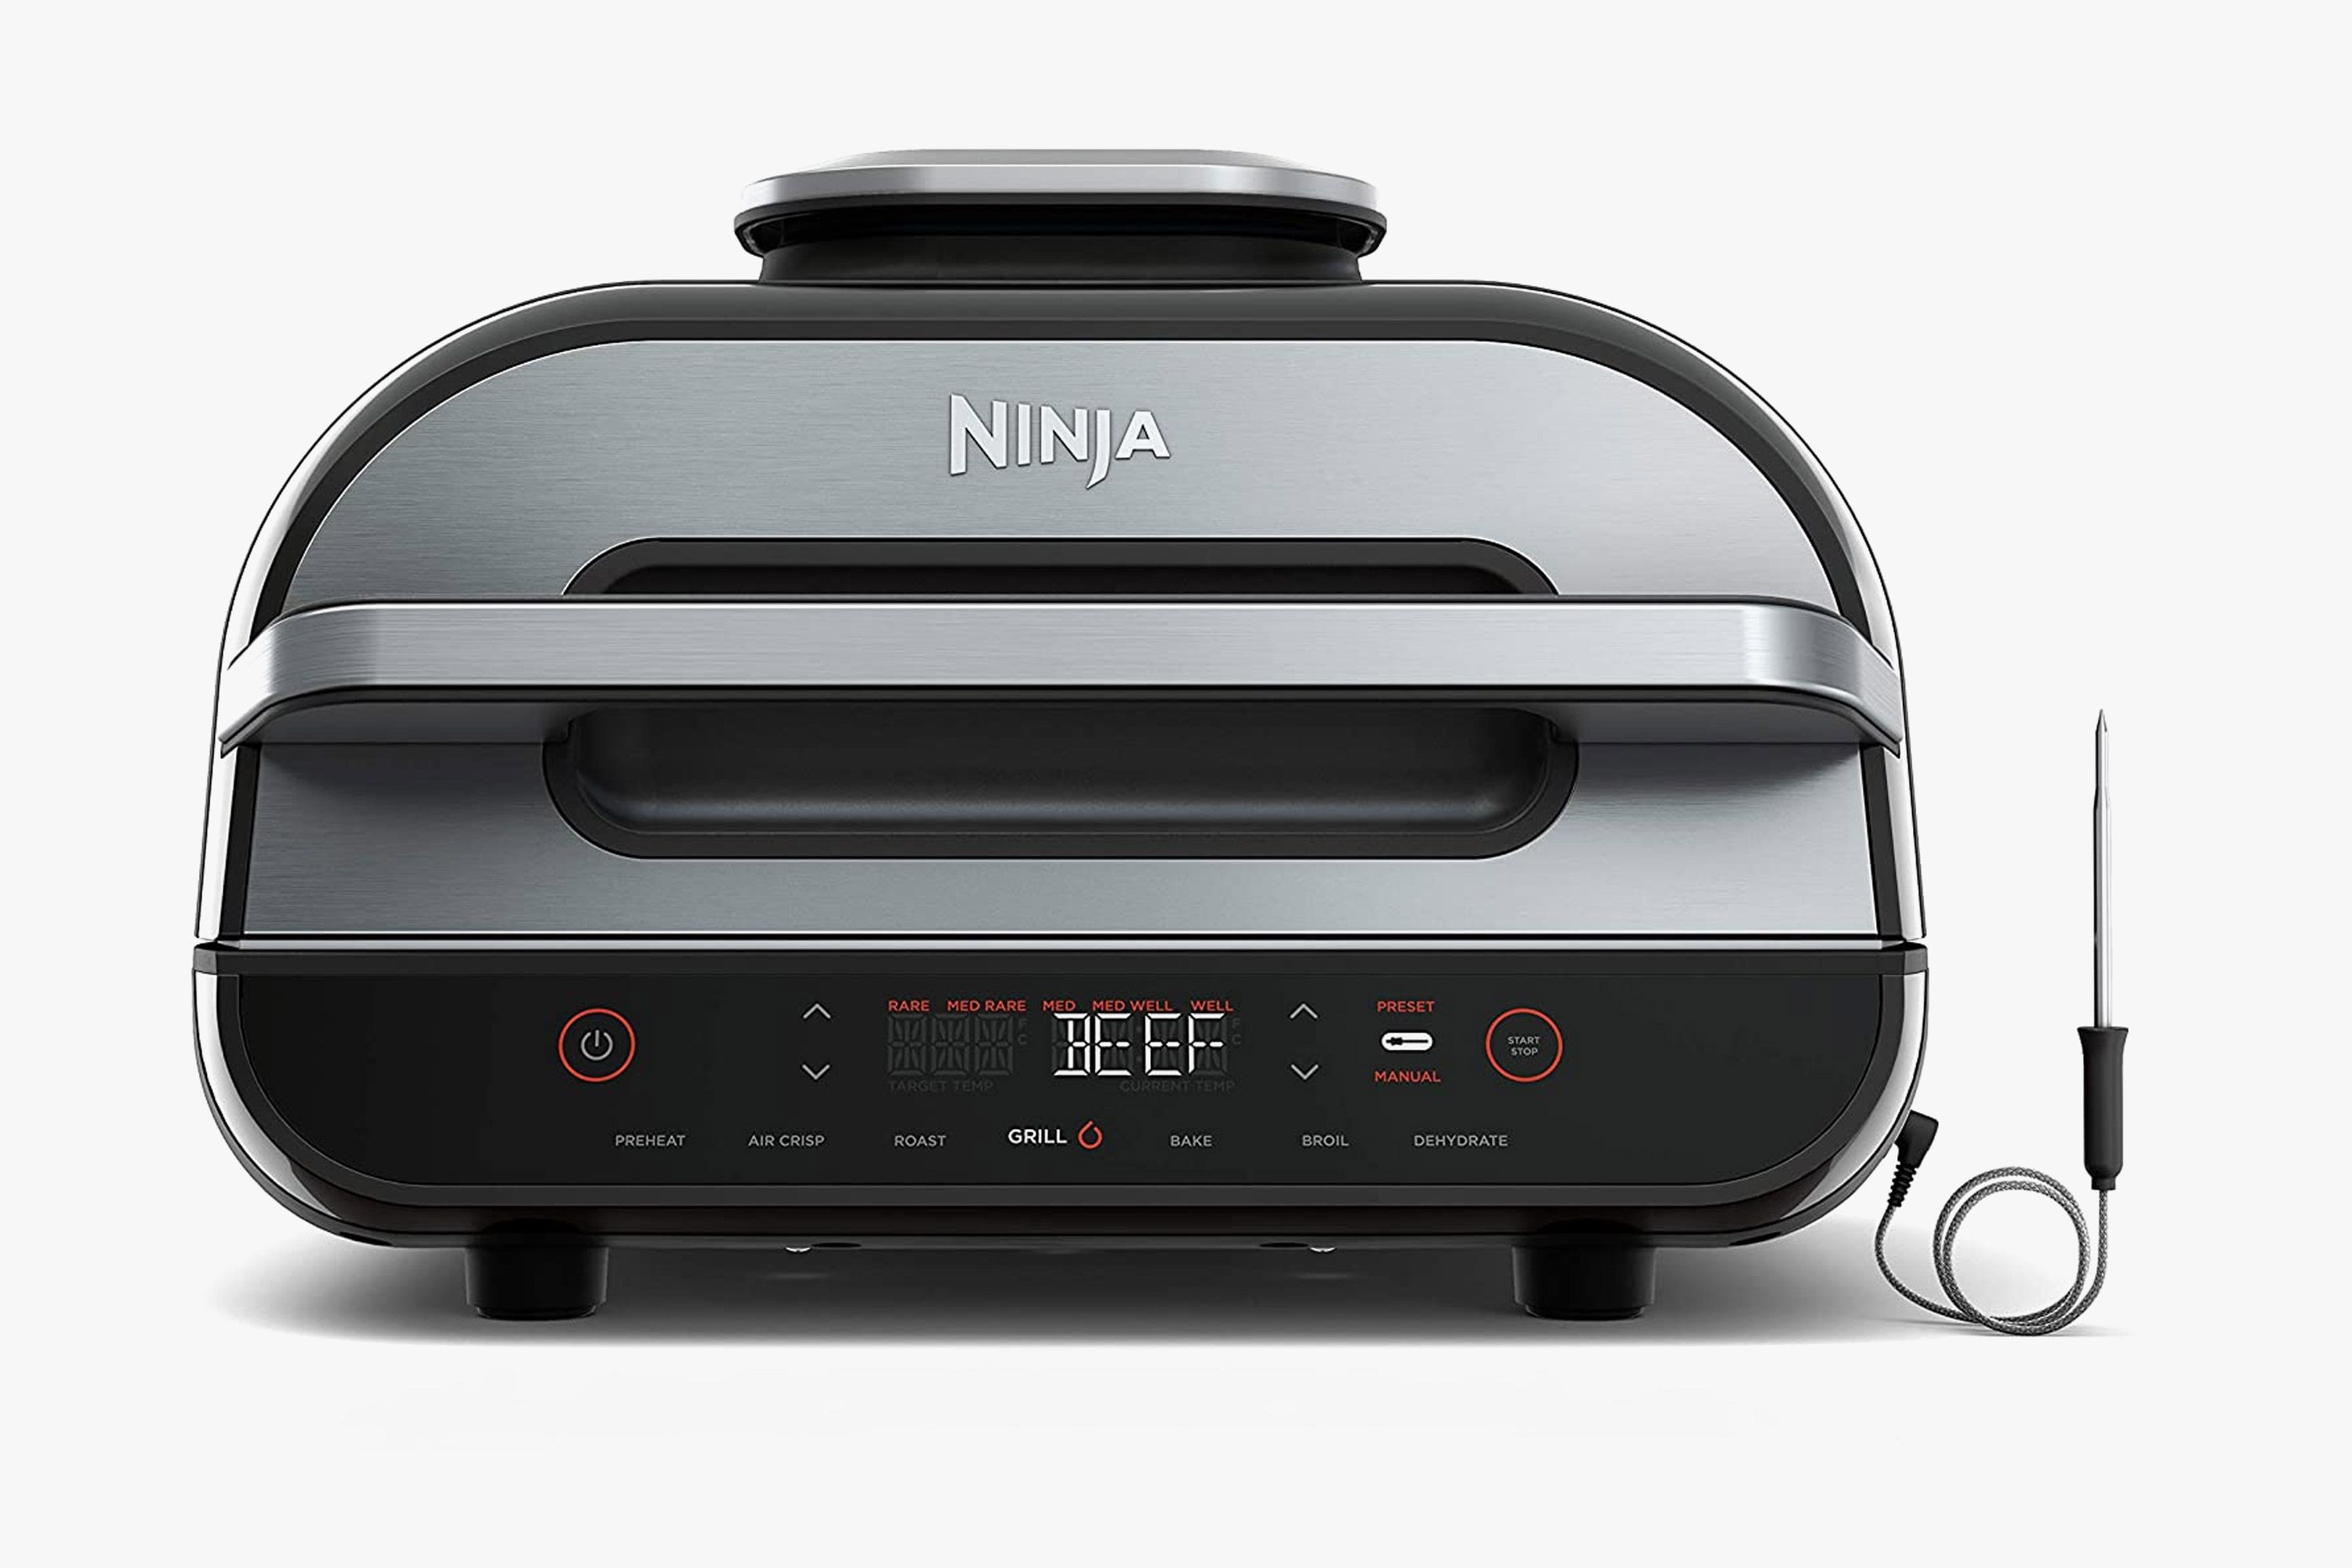 Ninja Foodi Grill Review and Findings - Grill Product Reviews - Grillseeker